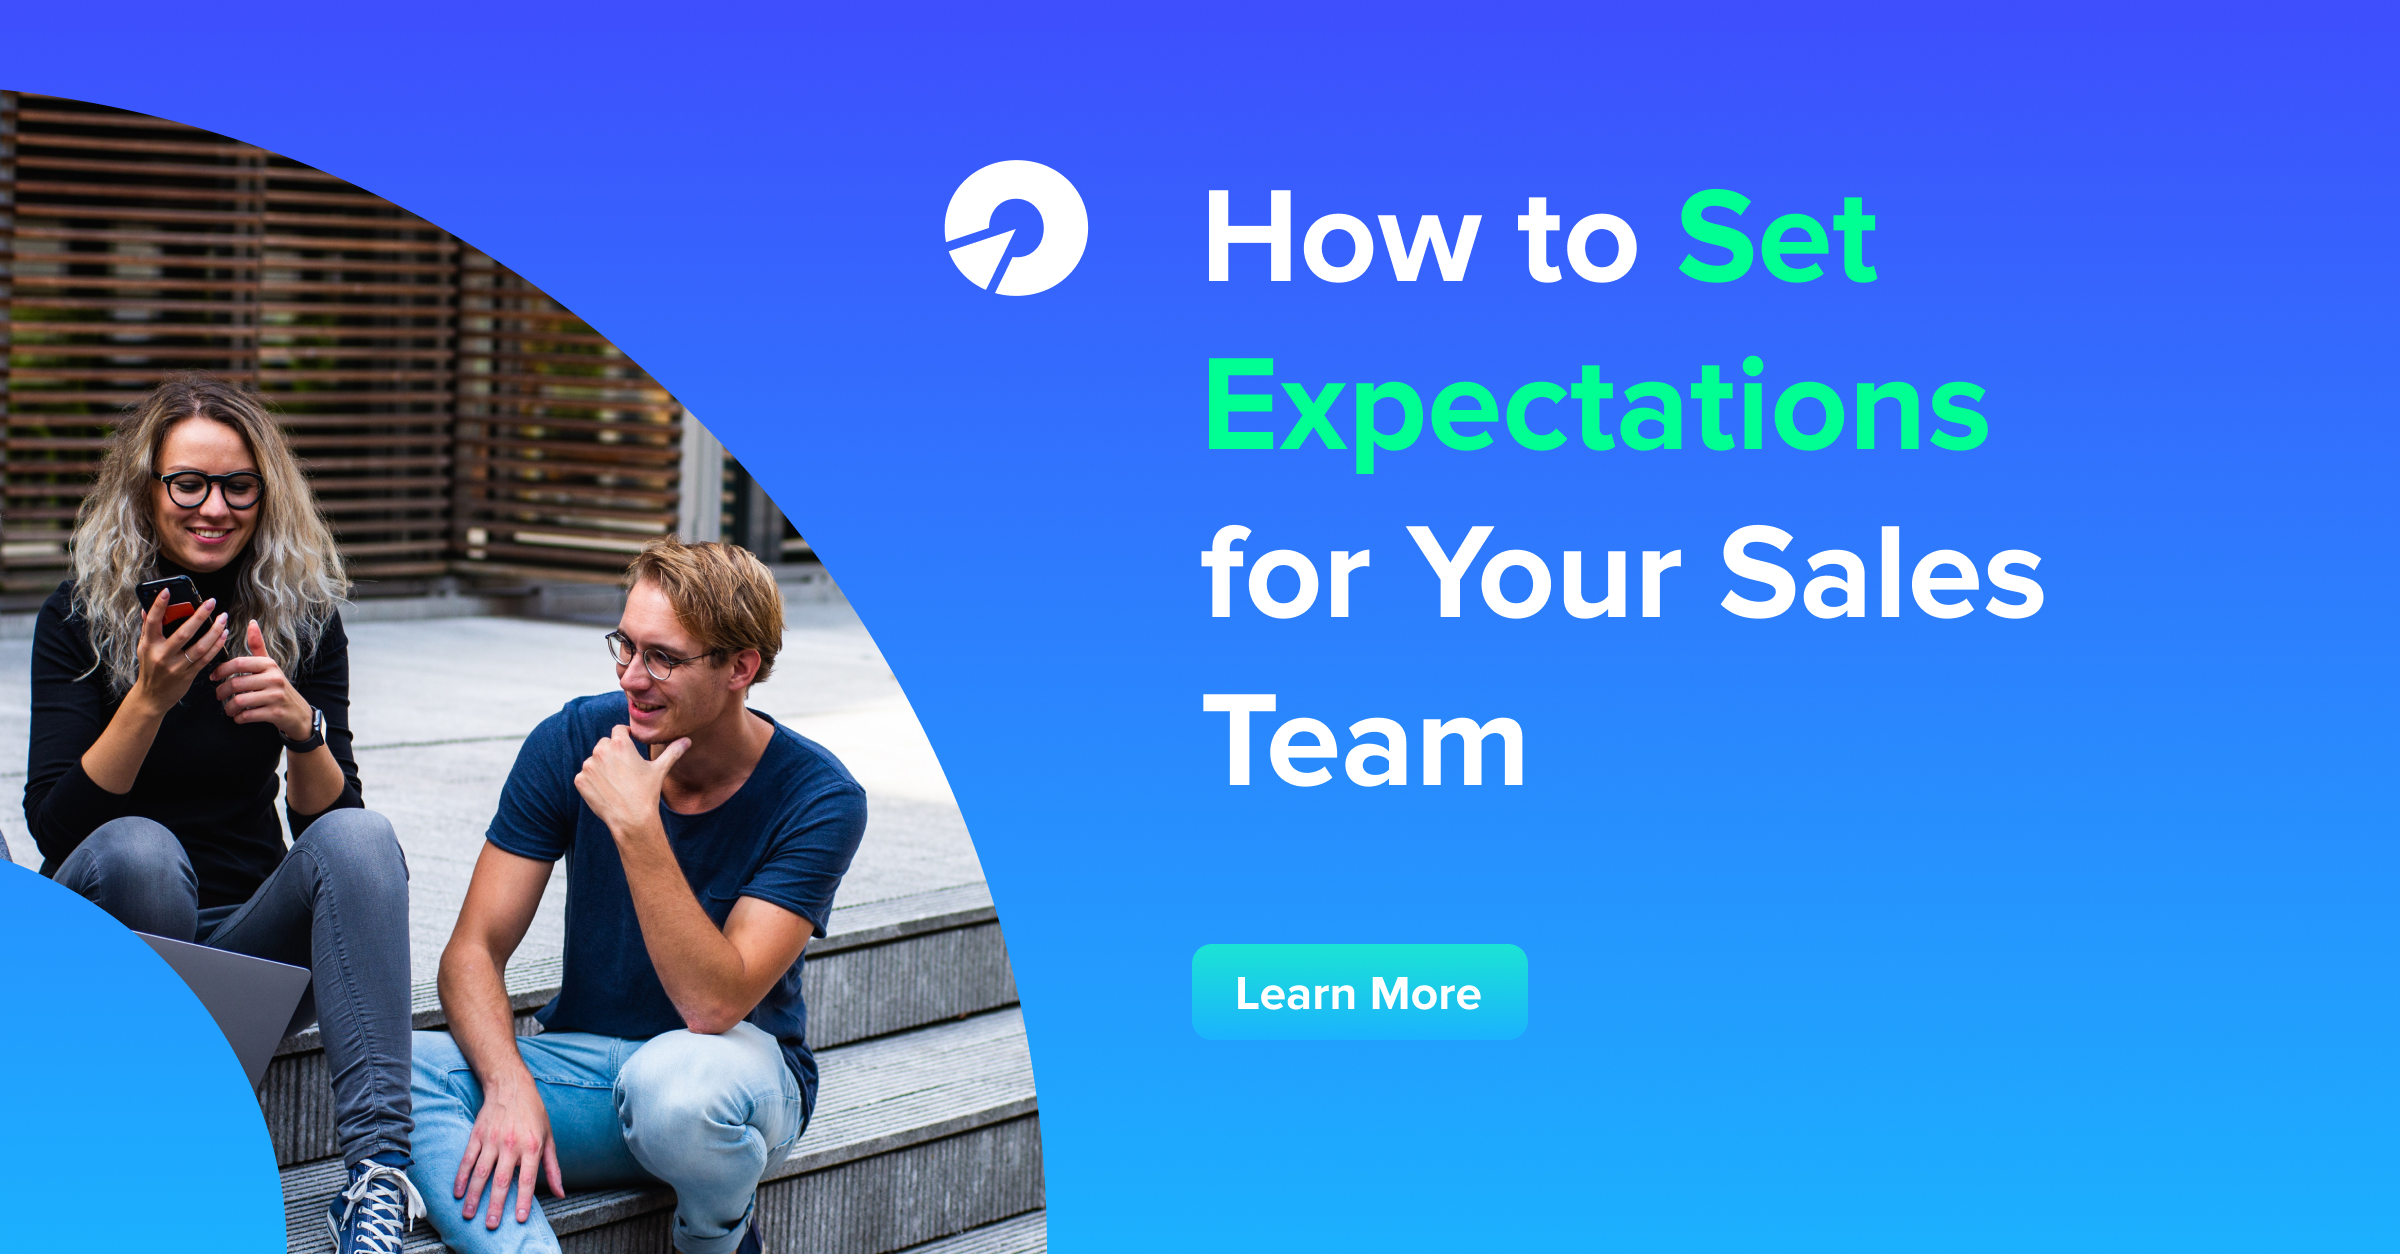 How to Set Expectations for Your Sales Team